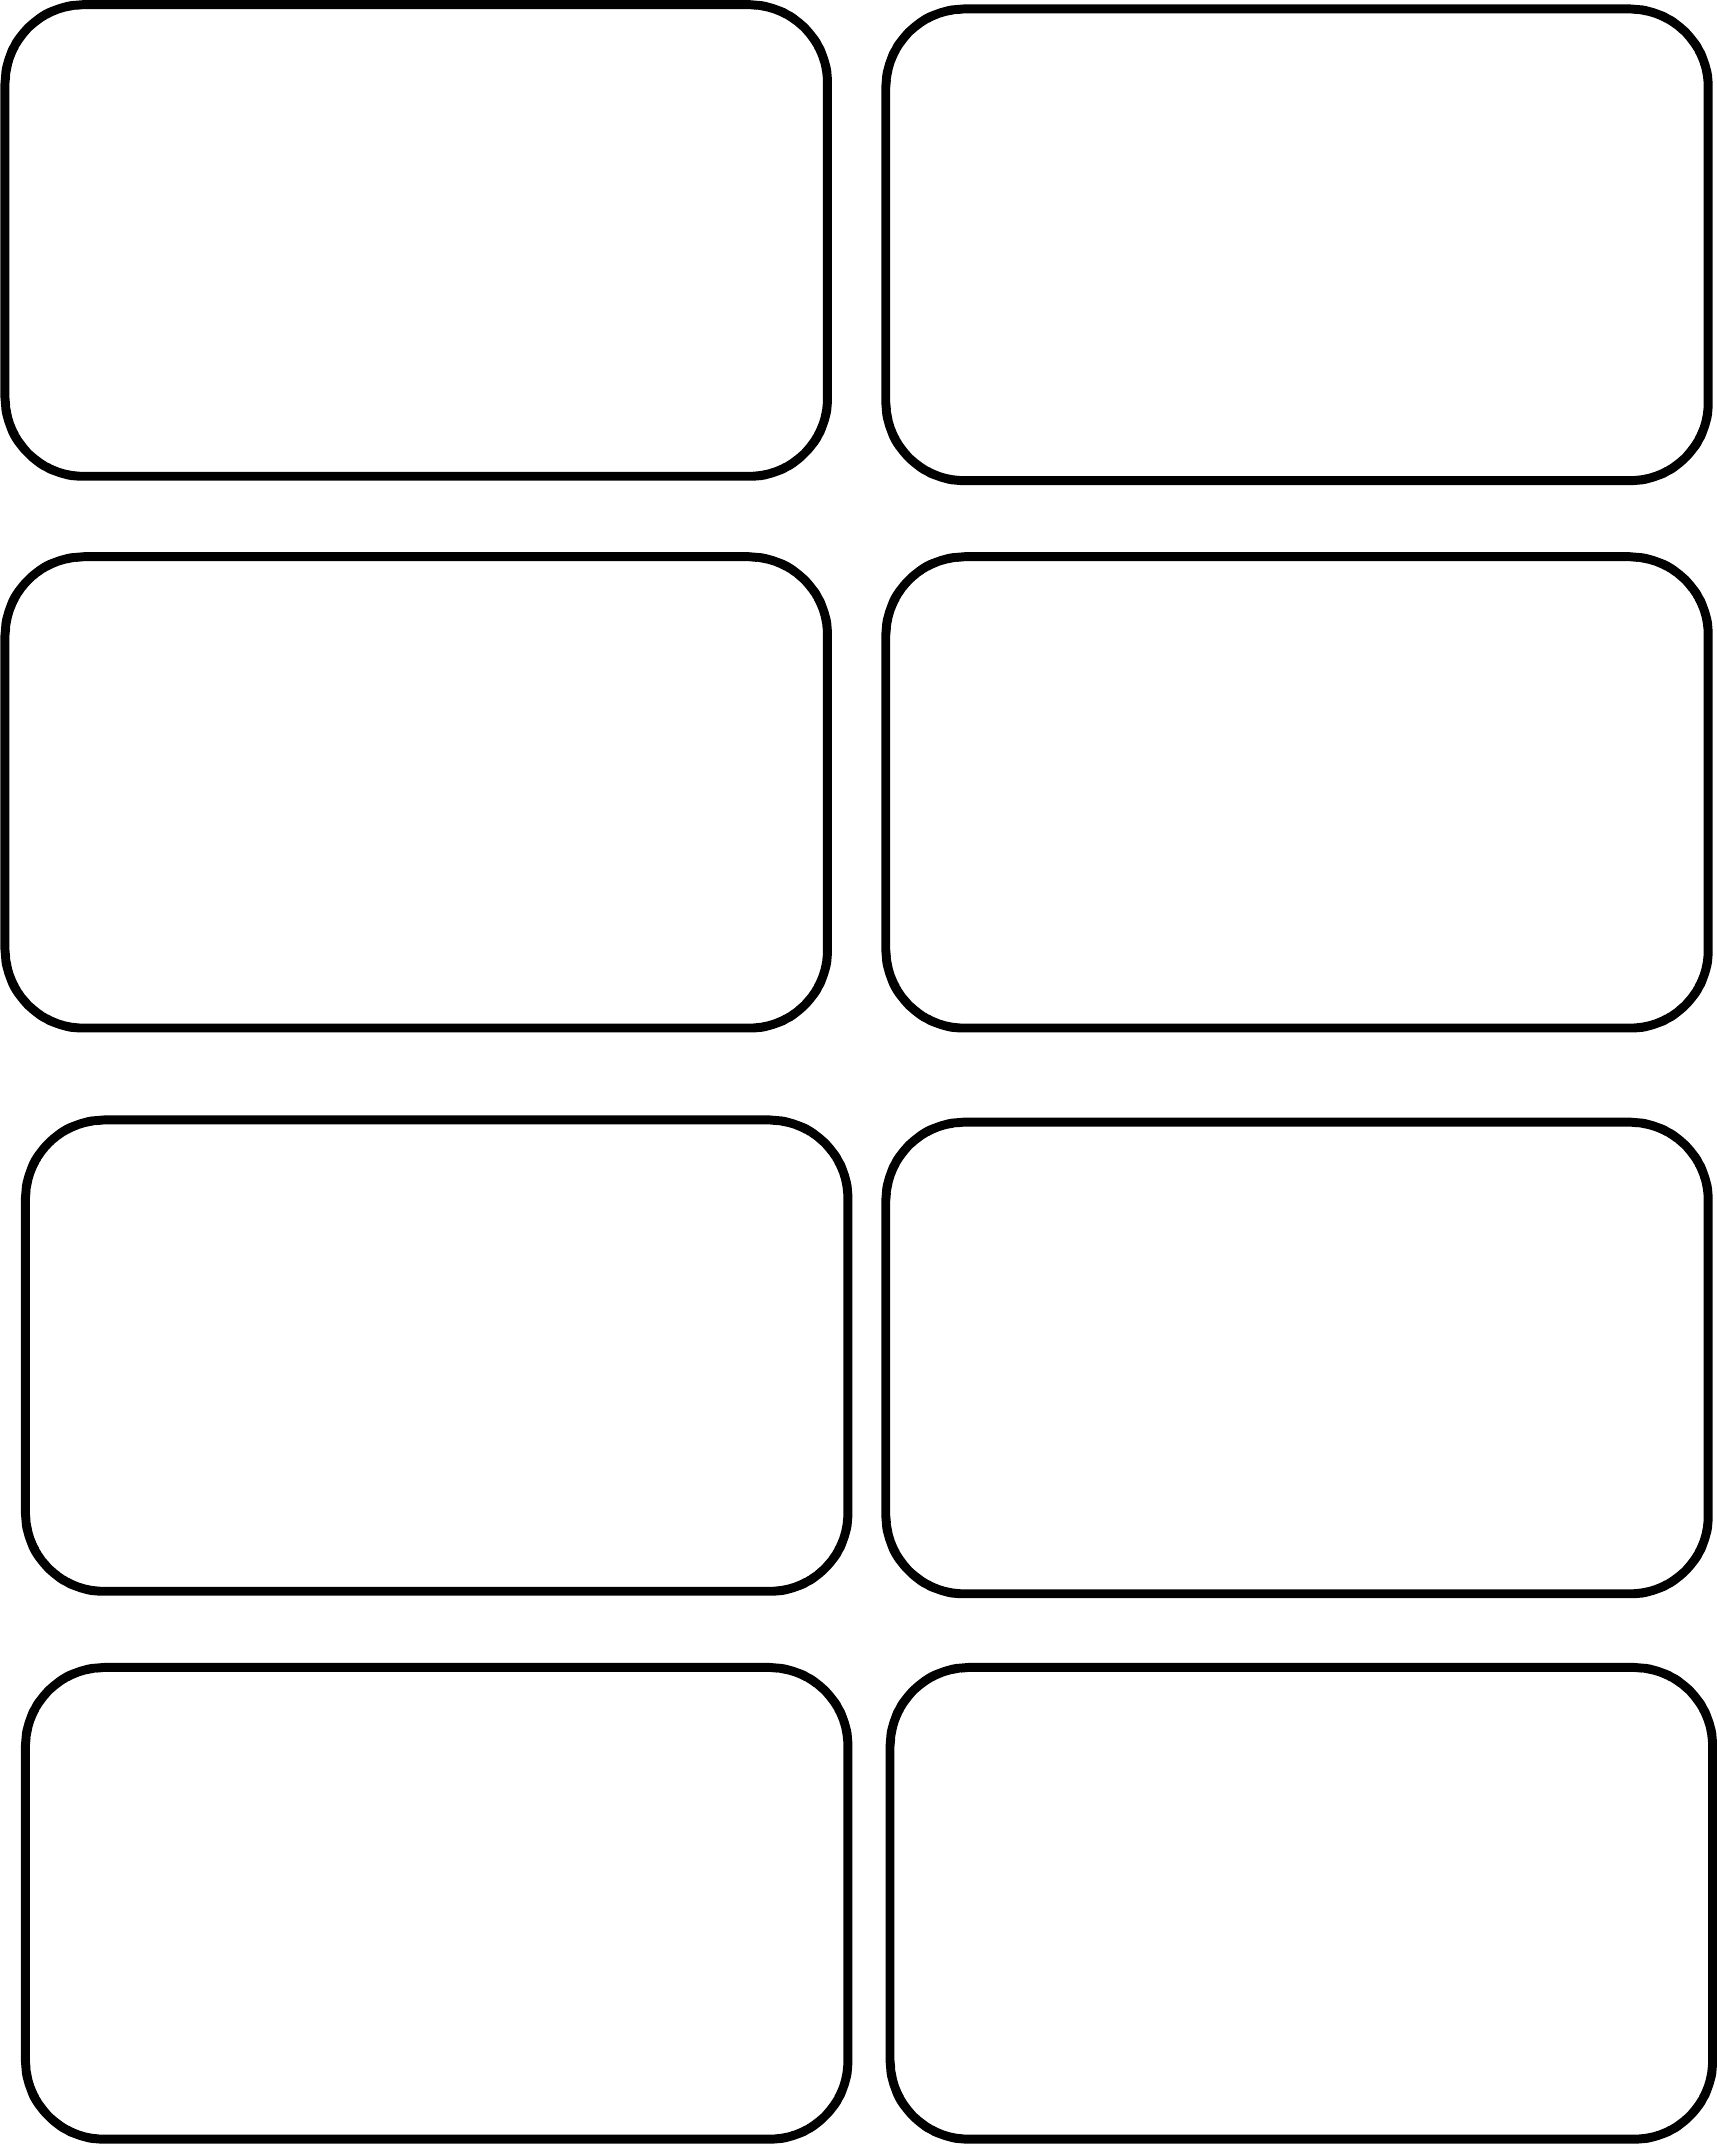 Template Of Luggage Tag Free Download In Blank Luggage Tag Template